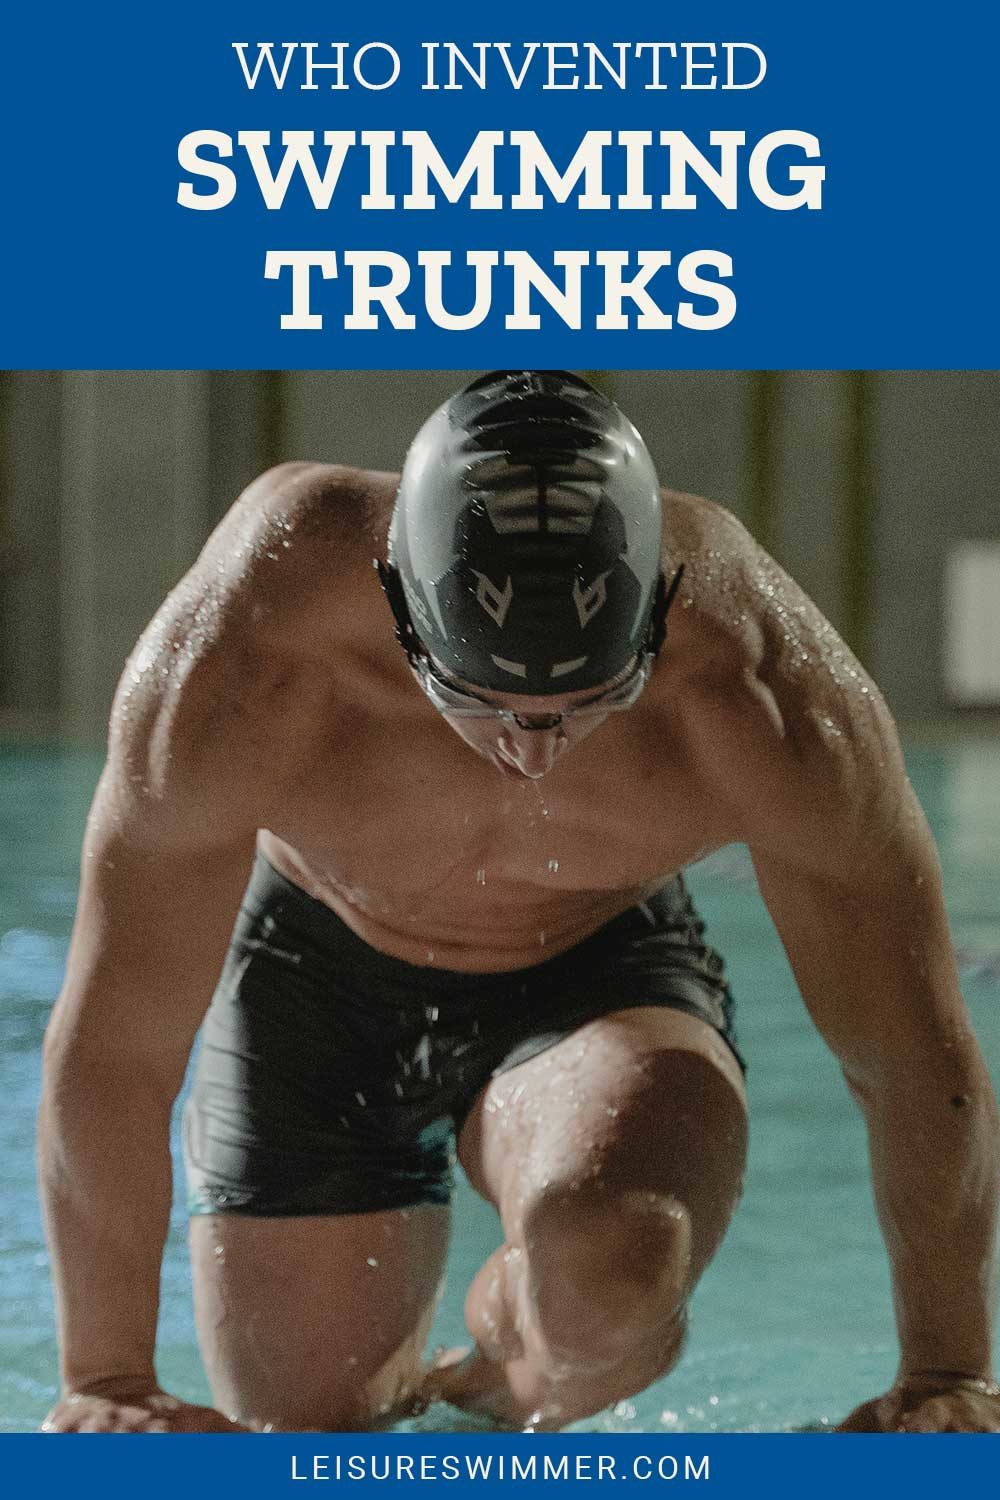 Man wearing black swimming trunk getting out of the pool - Who Invented Swimming Trunks?